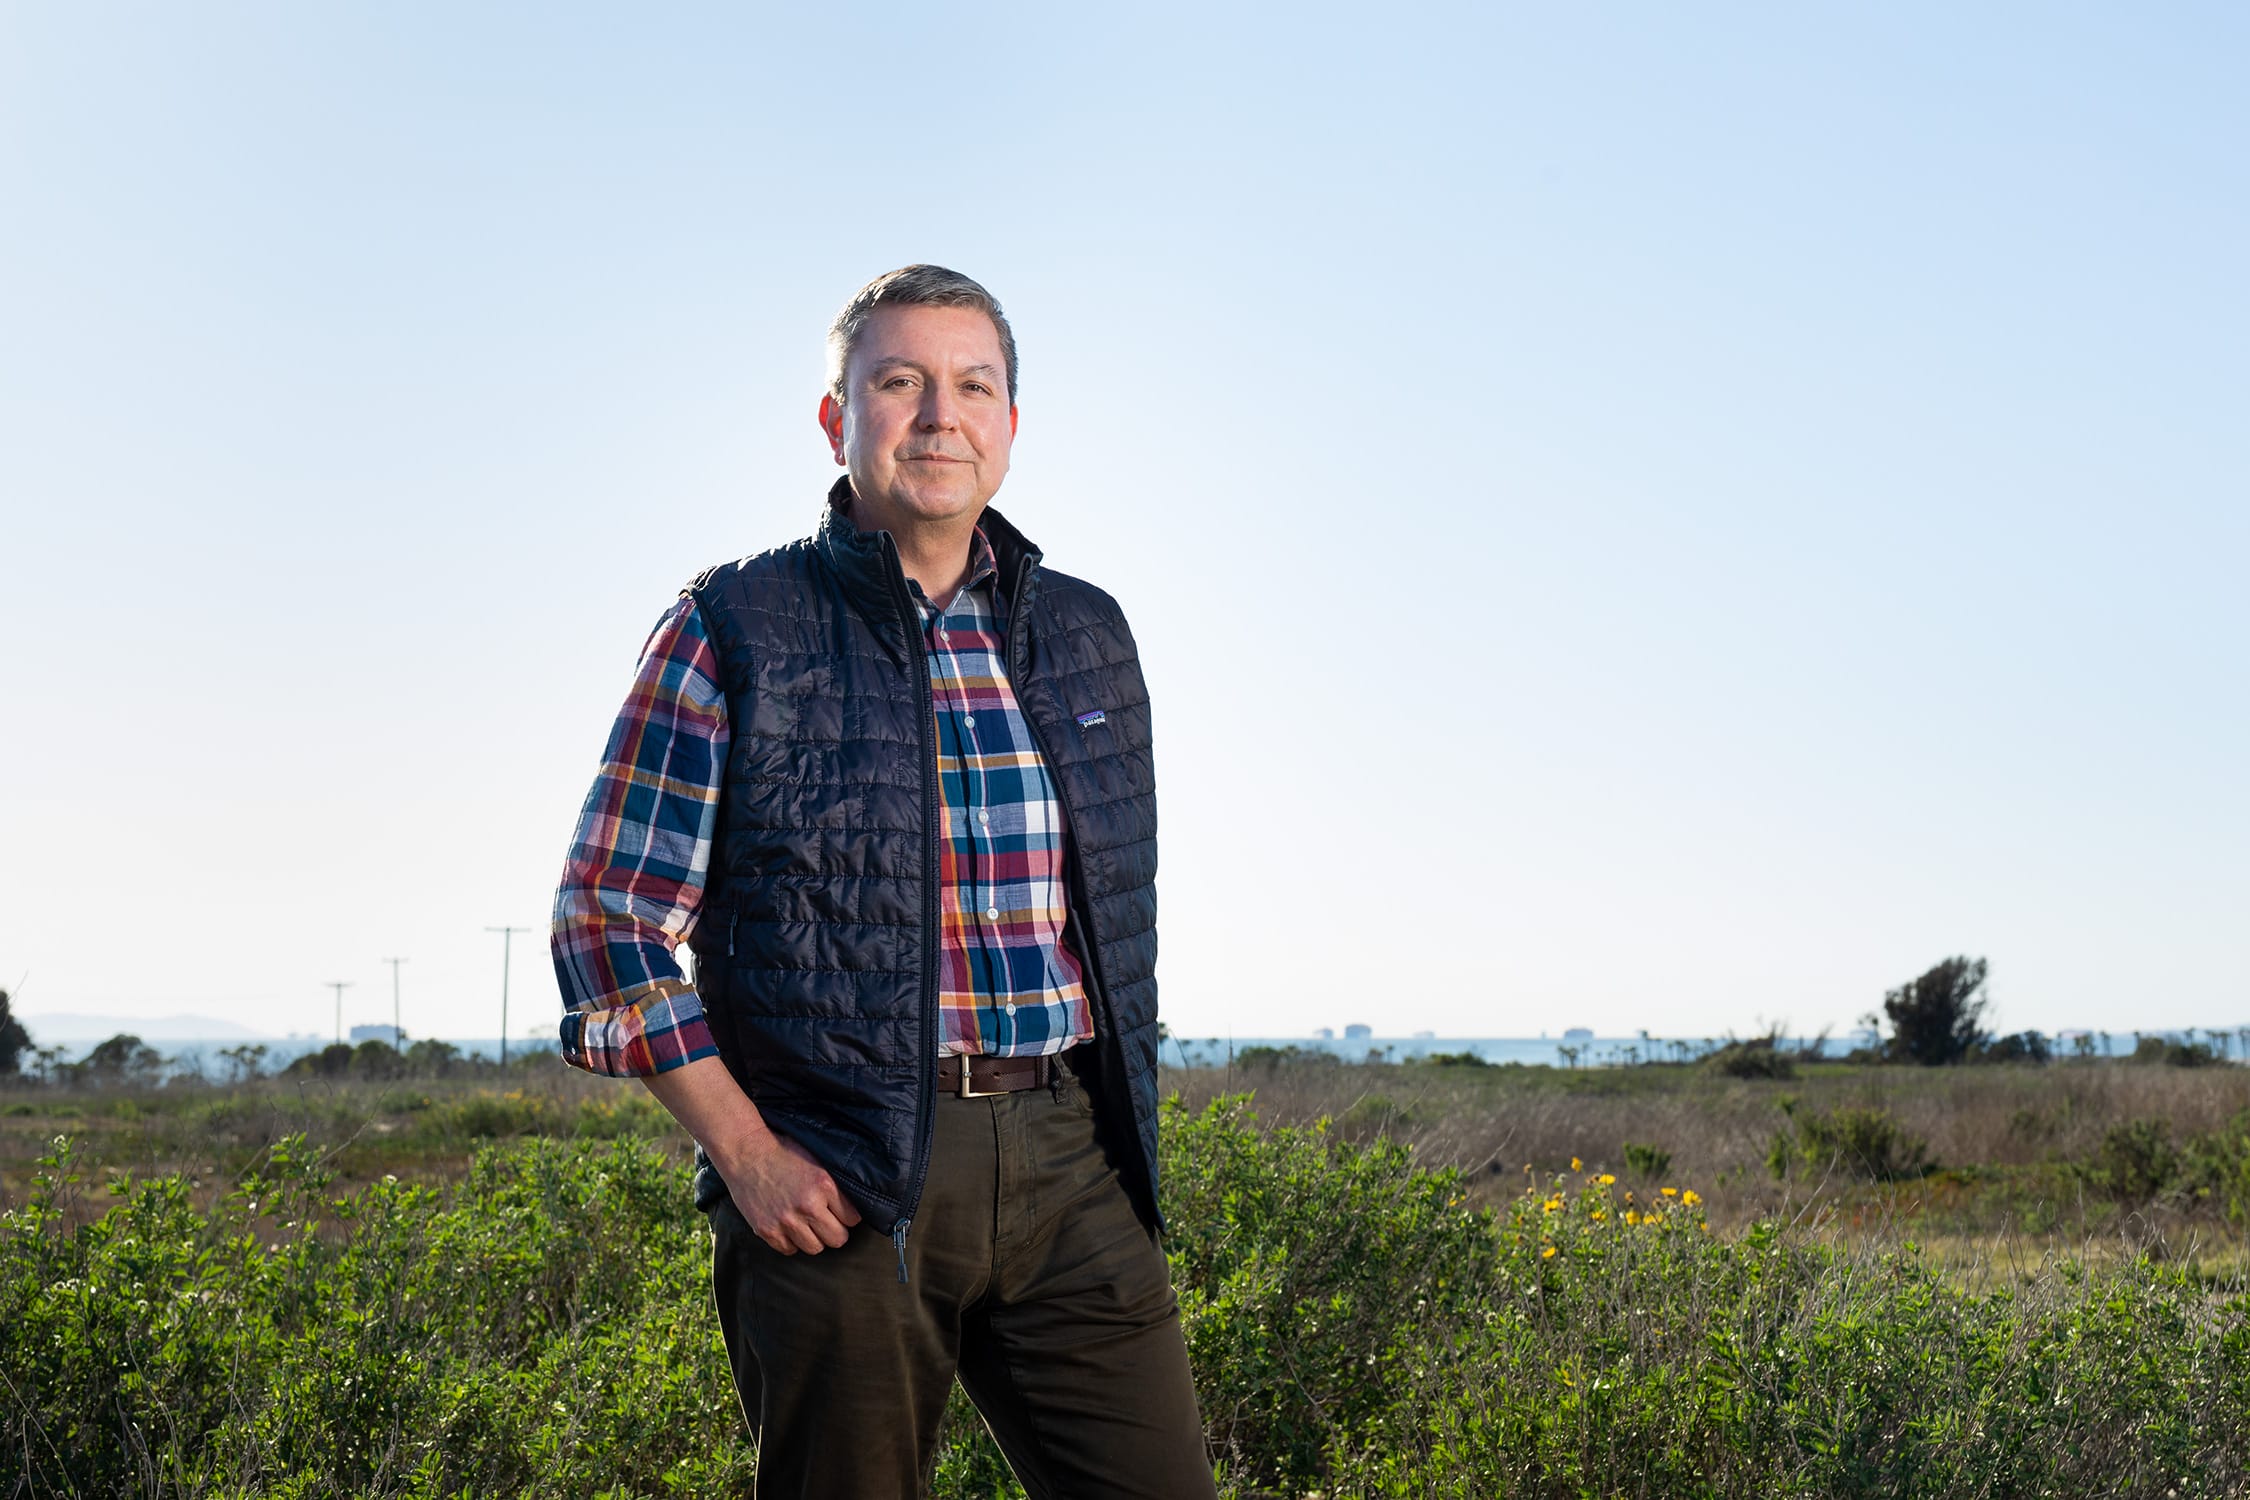 A man in a plaid shirt standing in a field.